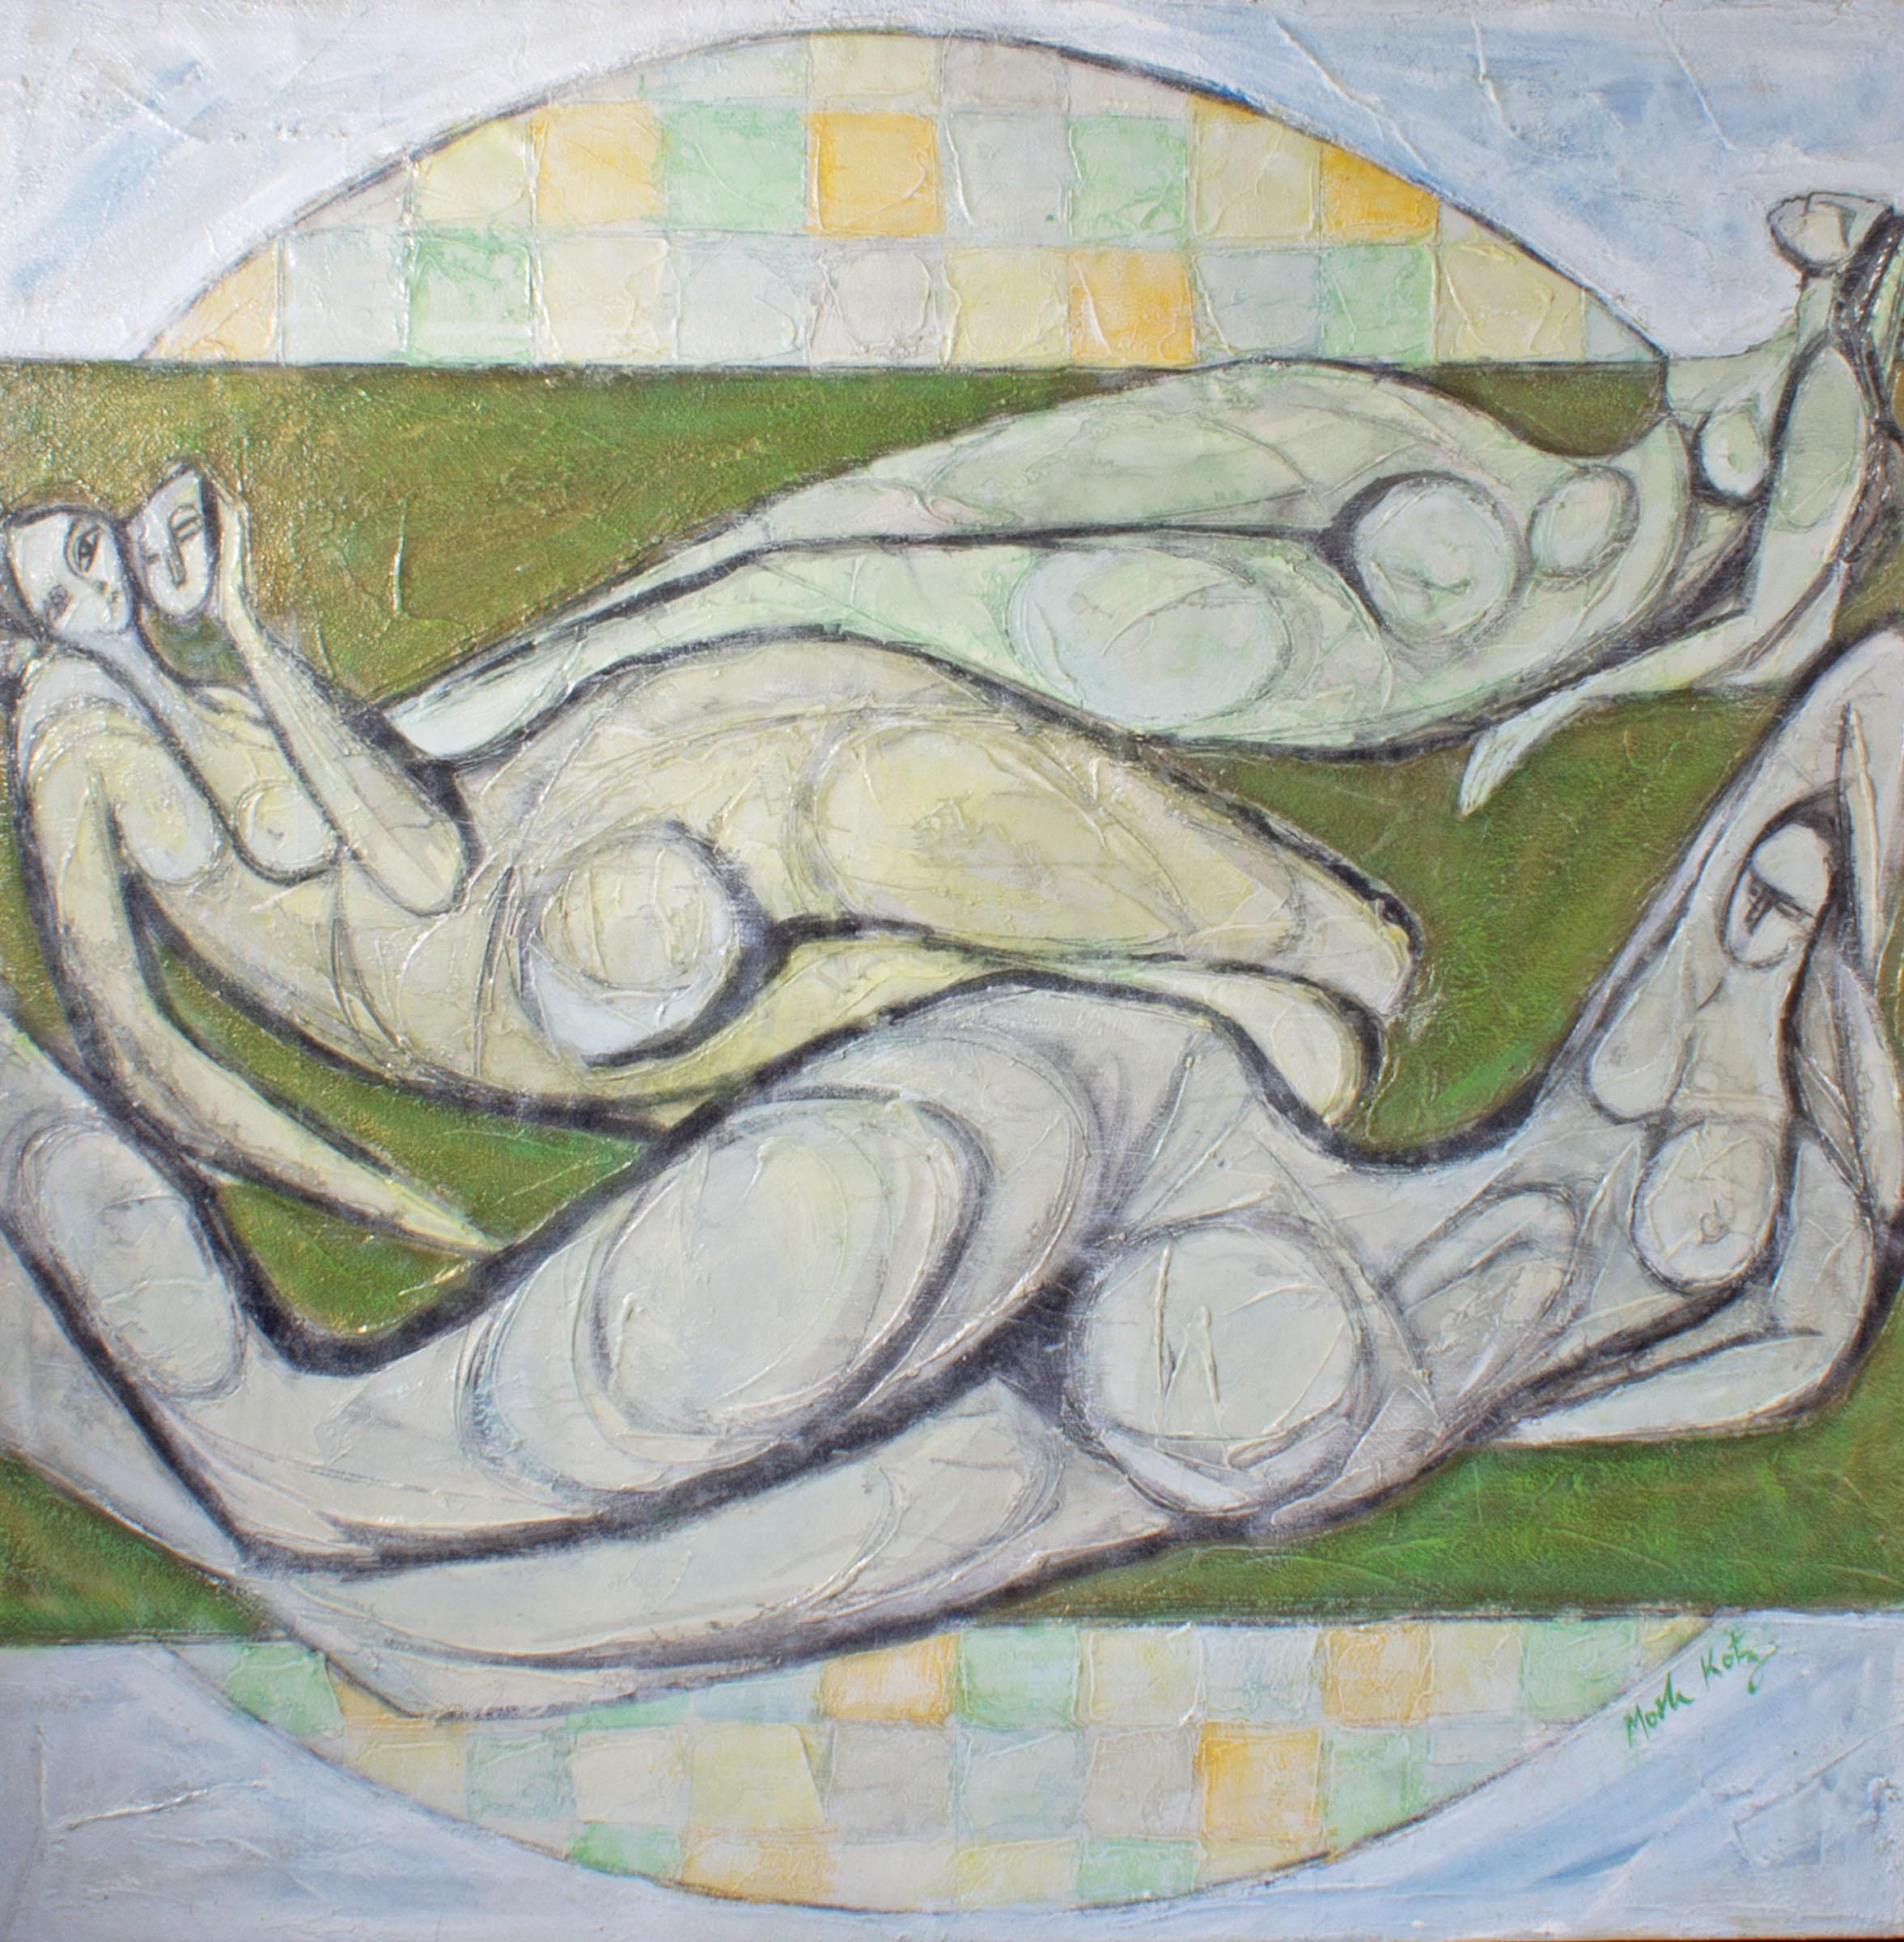 An oil on canvas painting of abstract nudes by Romanian- Israeli artist Mosche Katz (born 1937). The painting depicts three lounging female nudes upon a green ground. Half circles filled with pastel squares are present above and below the figures